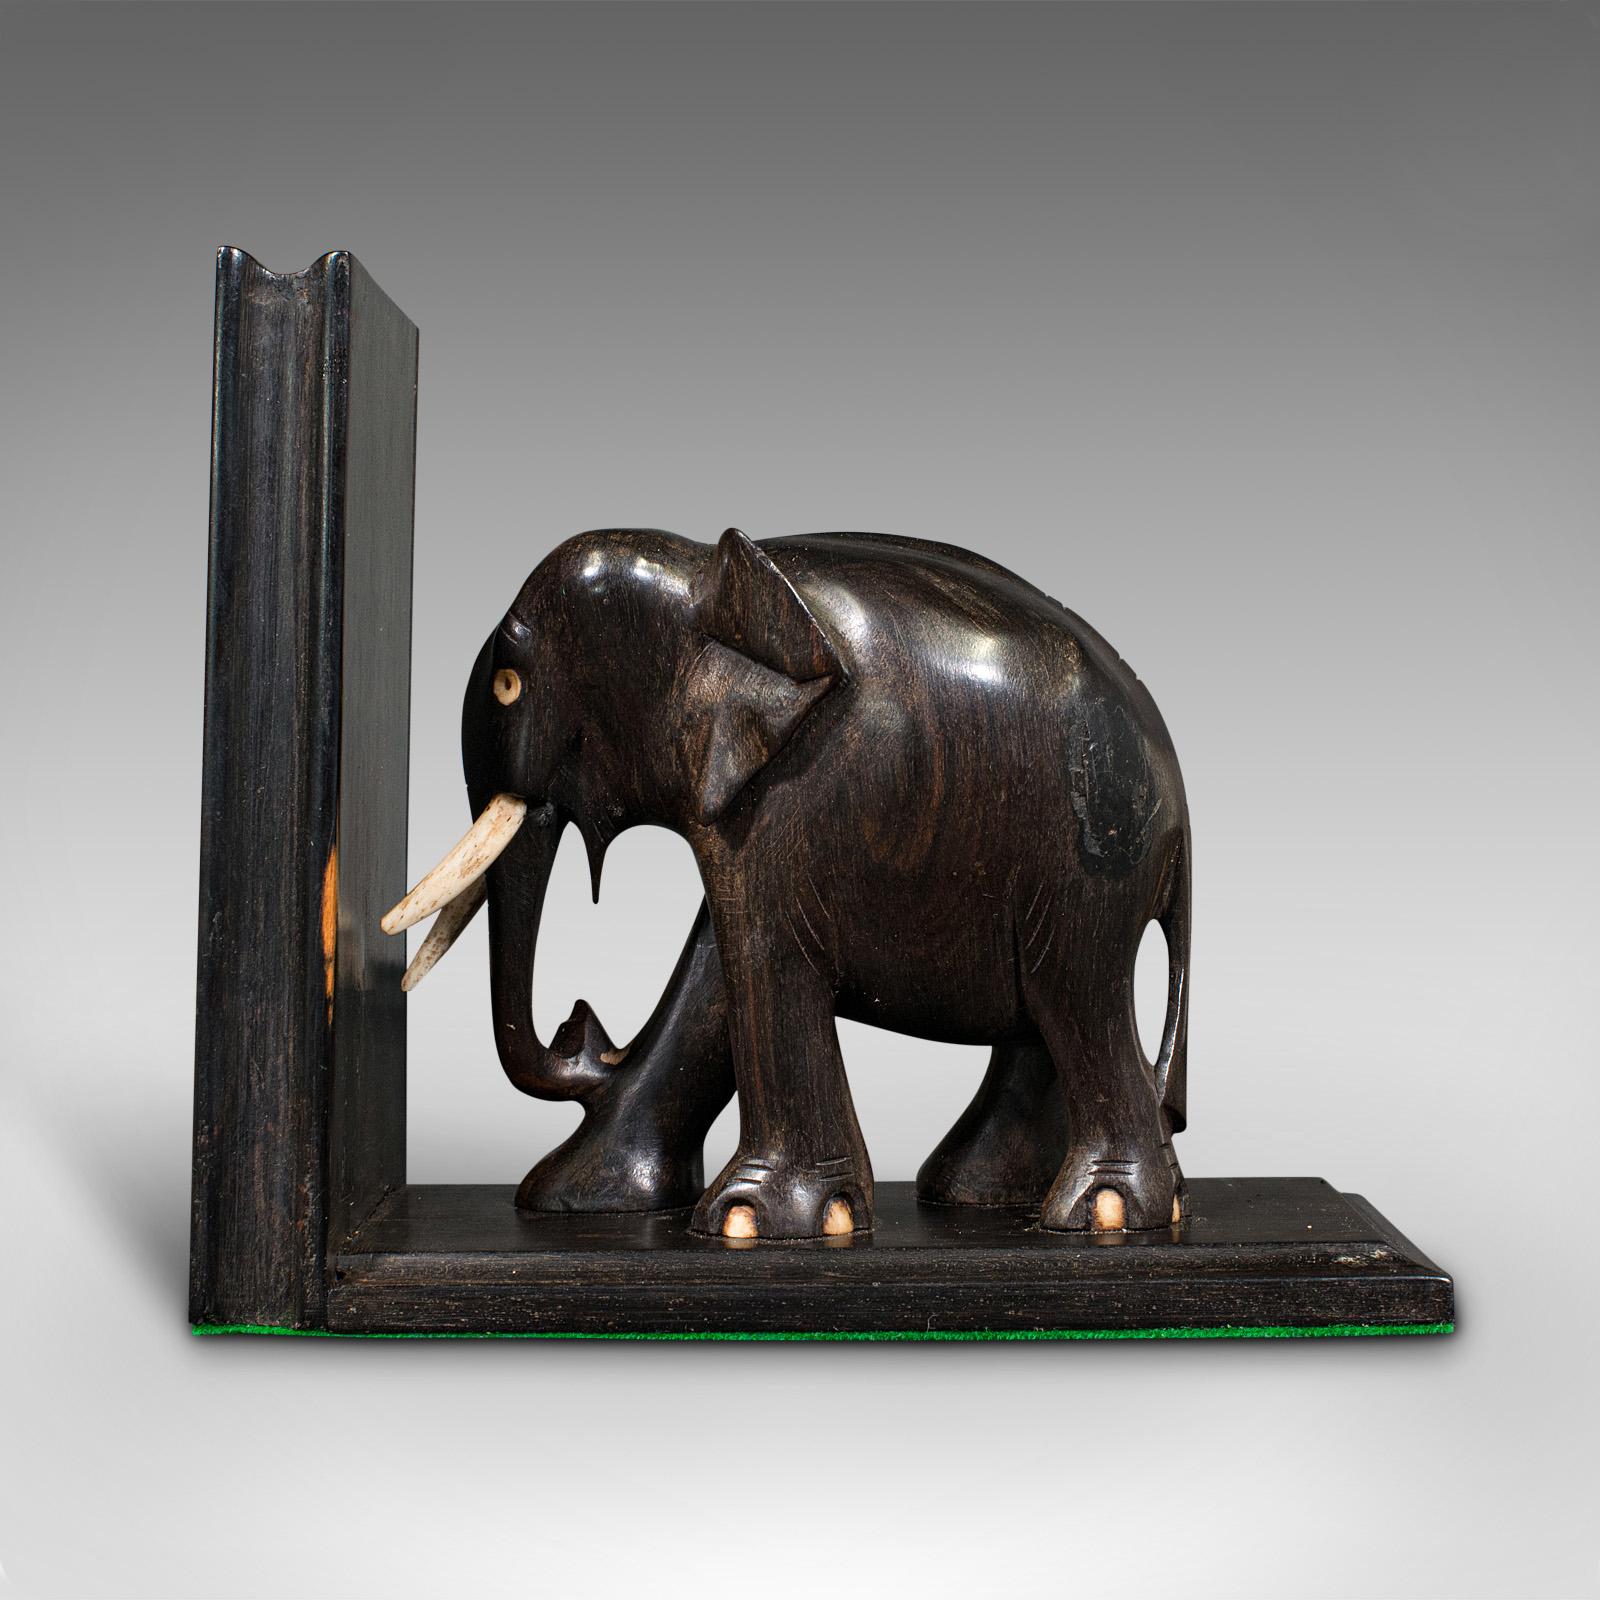 British Pair of Small Antique Elephant Bookends, Anglo Indian, Ebony, Victorian, C.1890 For Sale